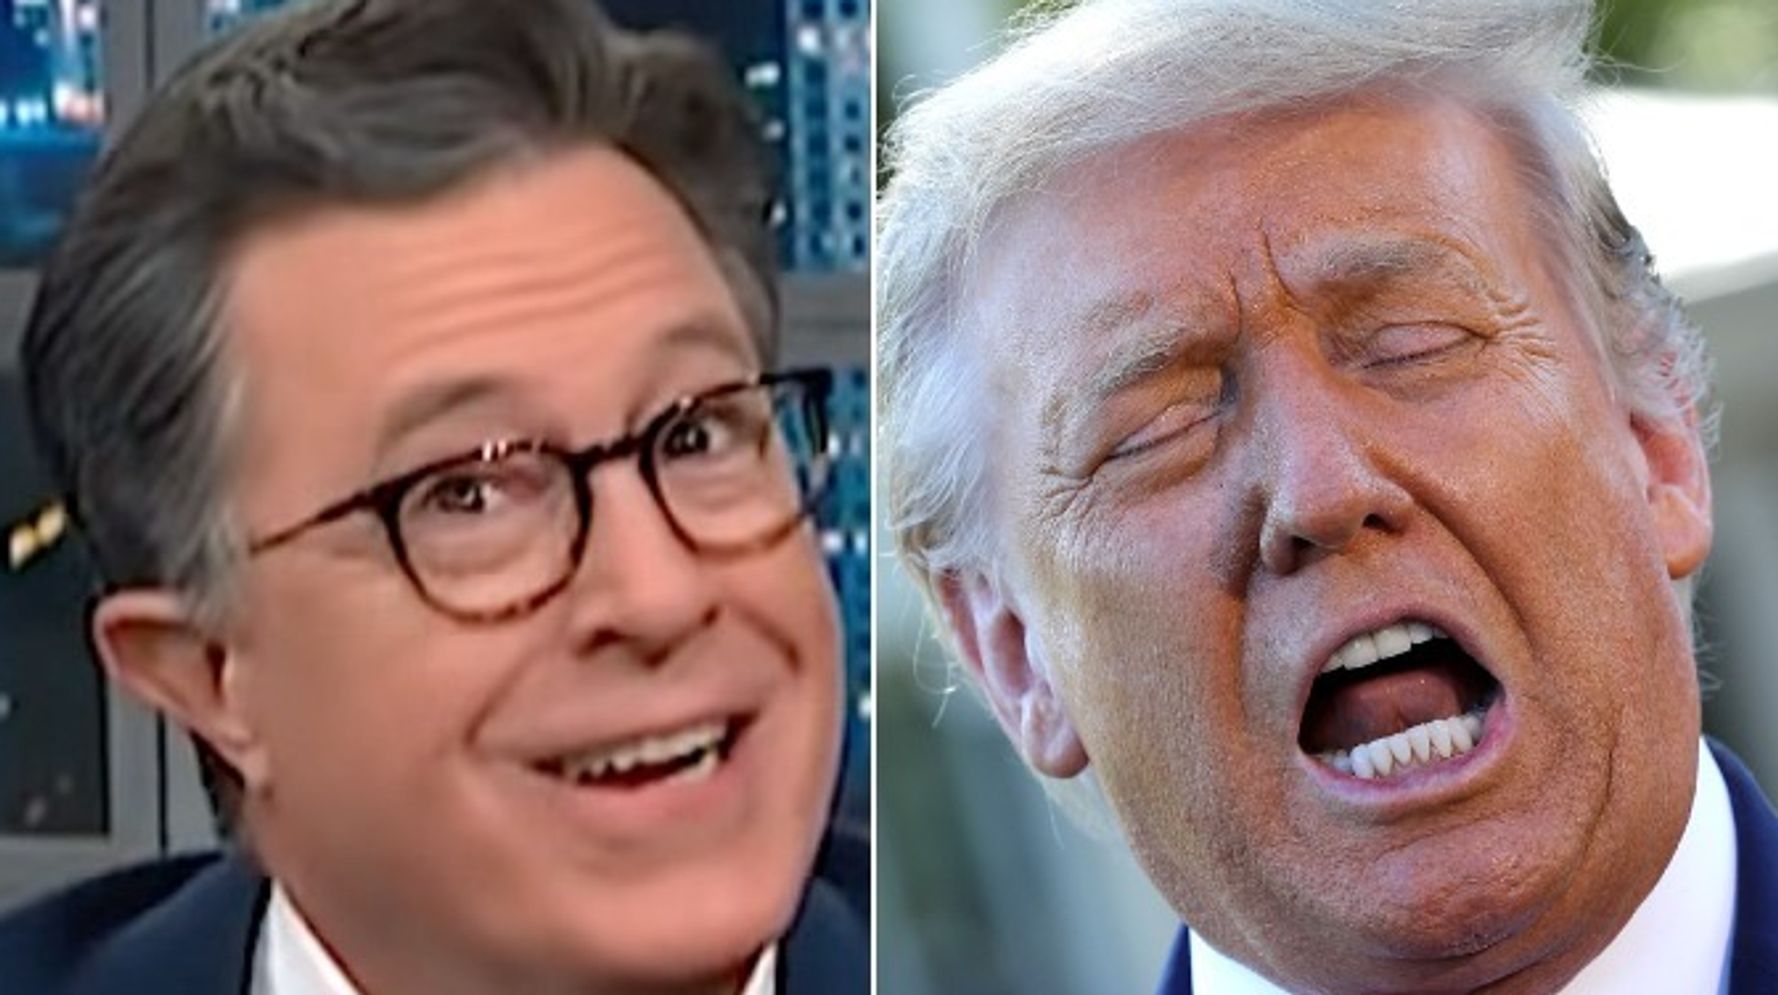 Stephen Colbert Reveals His Biggest Trump Wish: 'All I Want Before I Die'